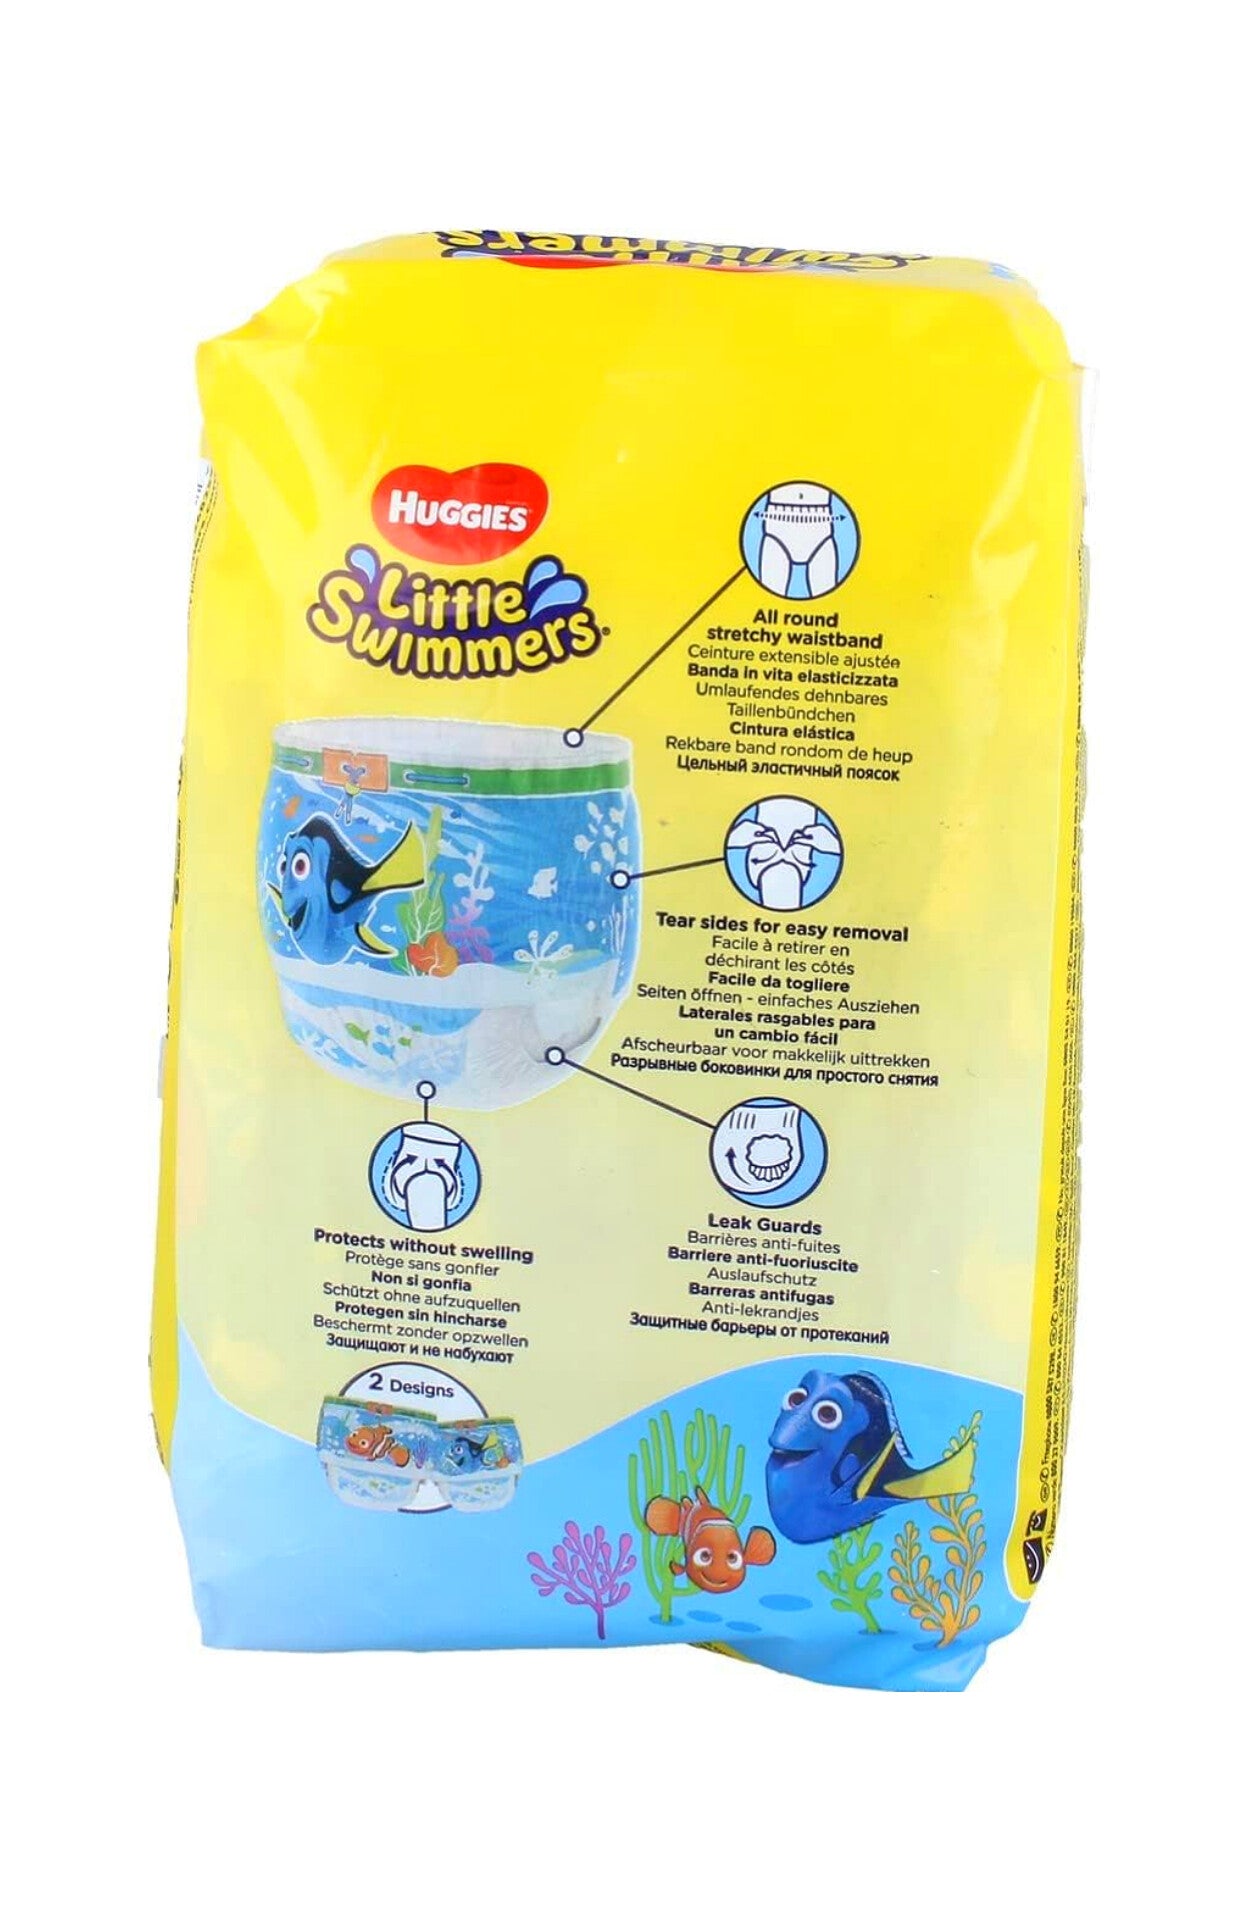 Huggies Little Swimmers Disposable Swim Nappies Size 3-4 - Diaper Yard Gh